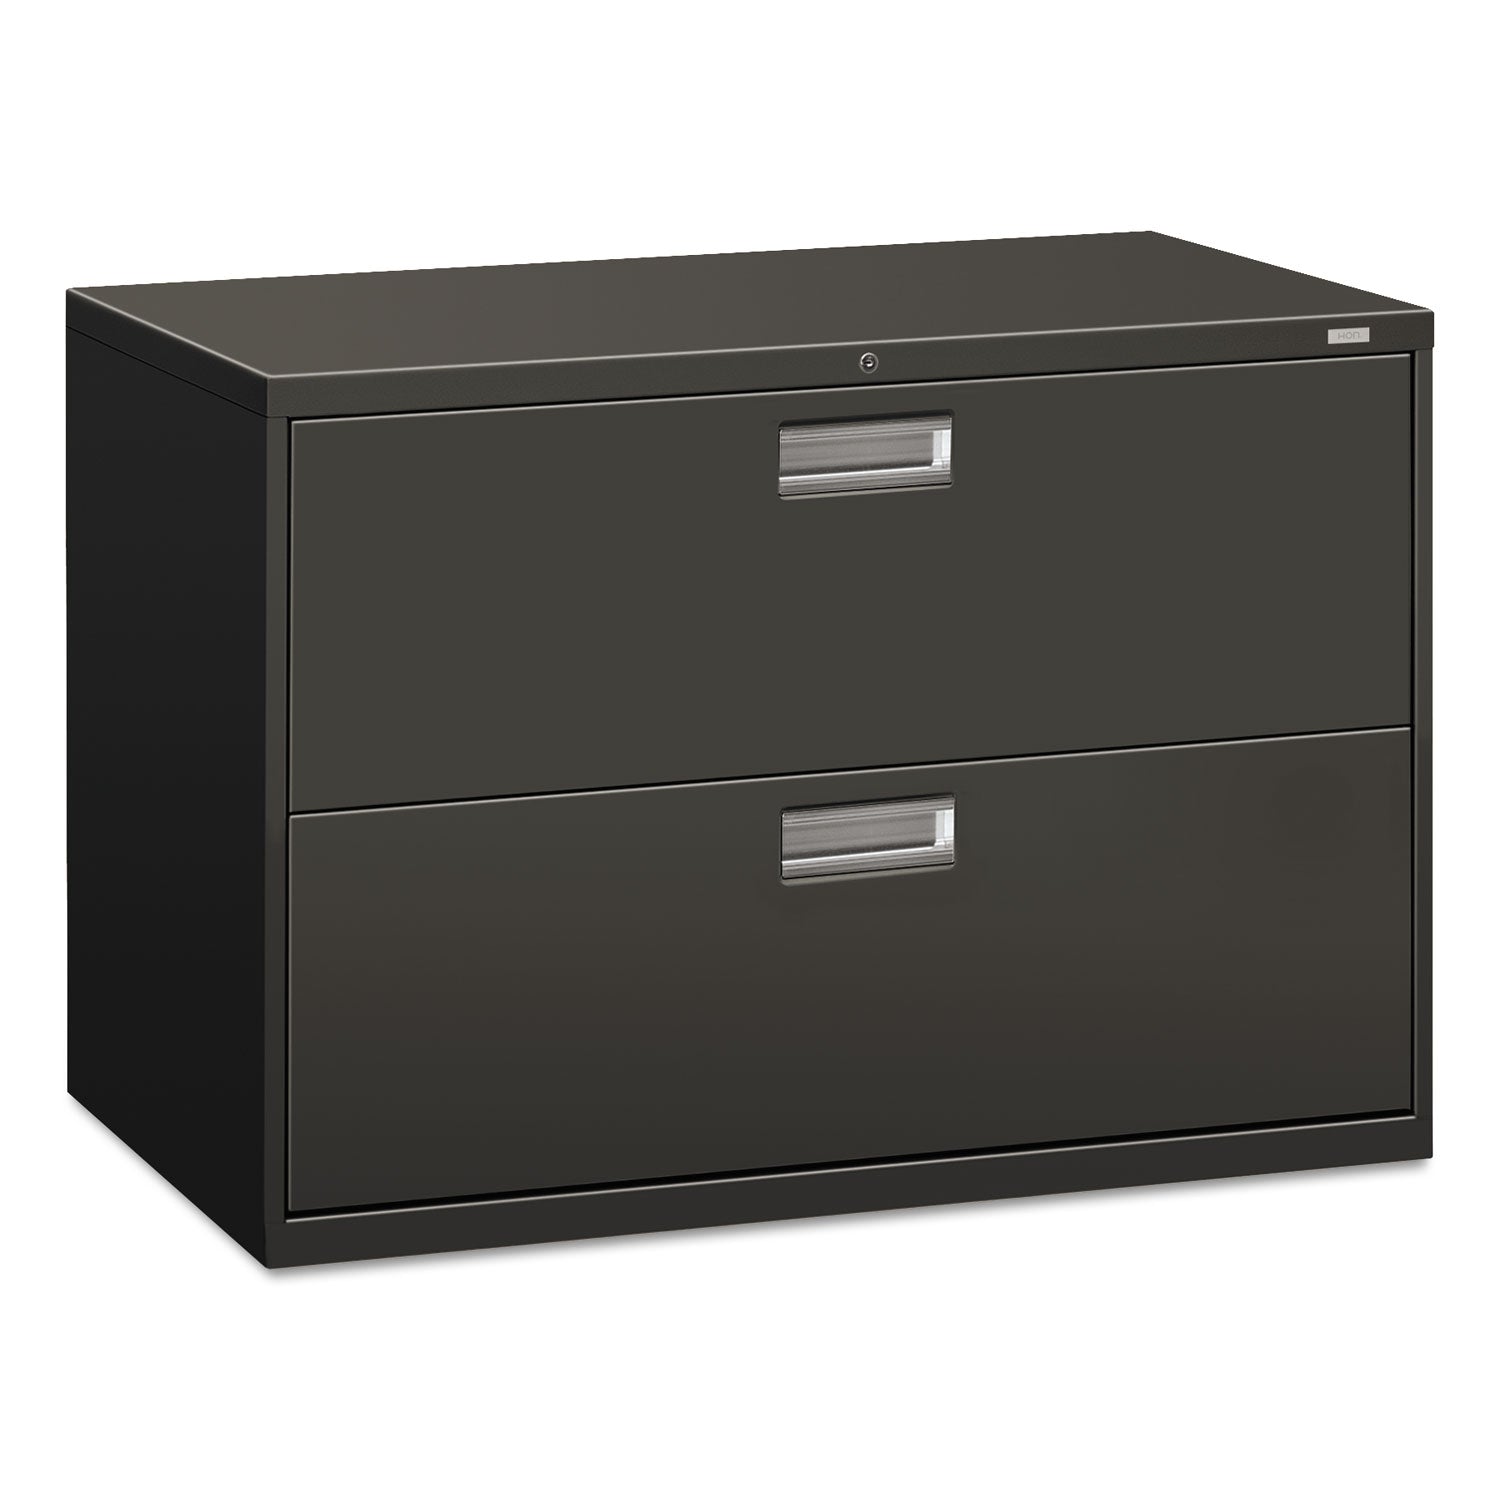 Brigade 600 Series Lateral File, 2 Legal/Letter-Size File Drawers, Charcoal, 42" x 18" x 28 - 